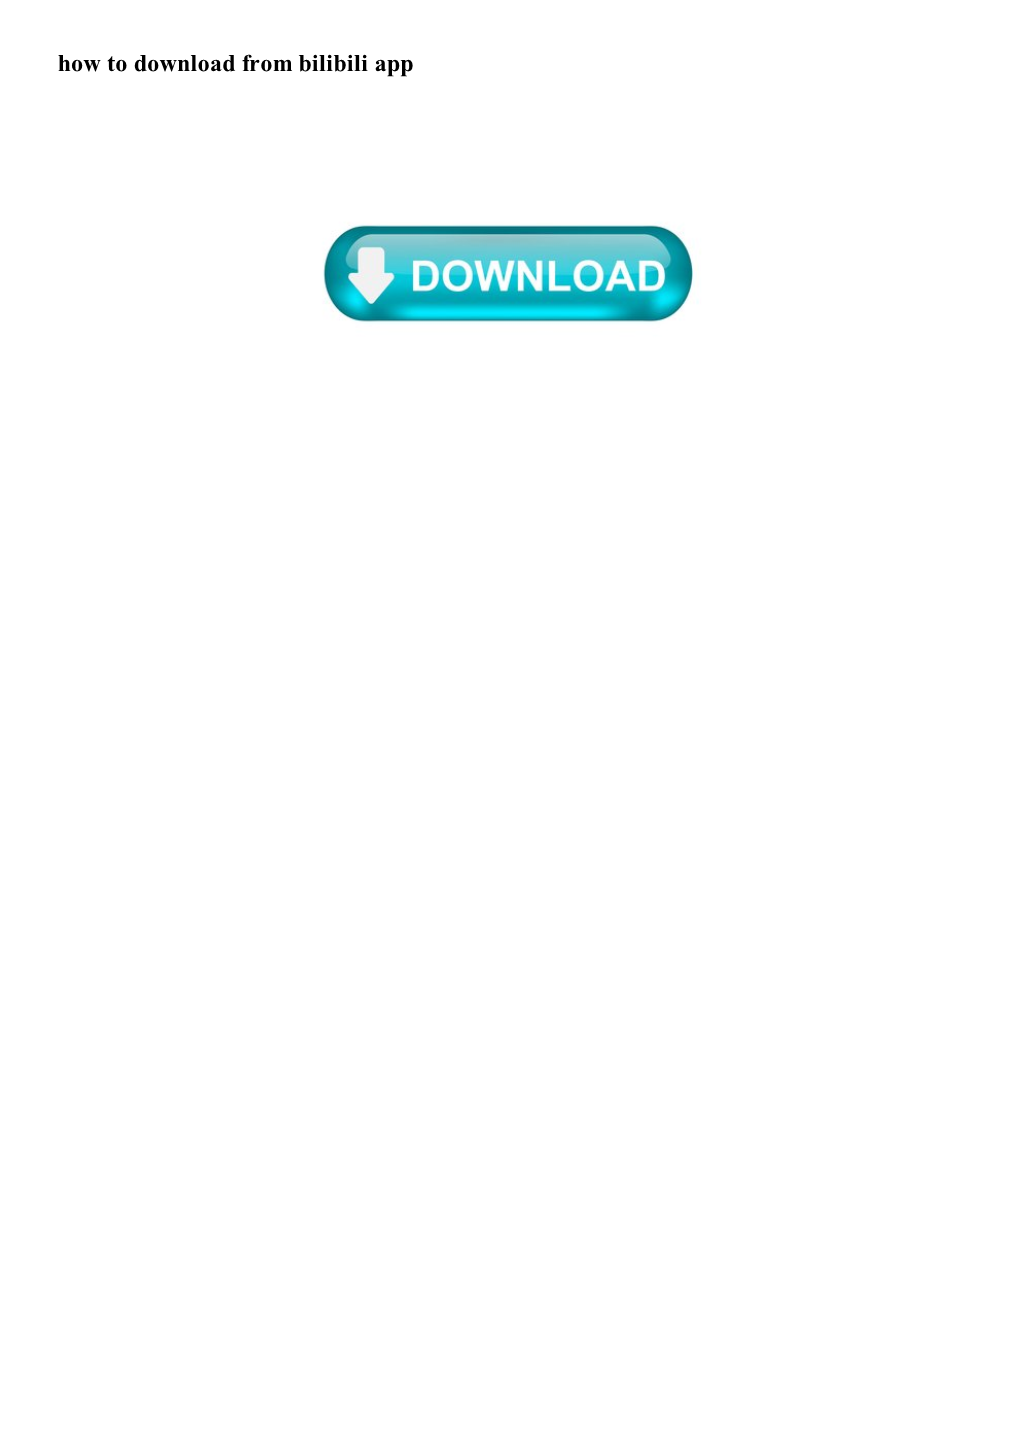 How to Download from Bilibili App How to Download from Bilibili App